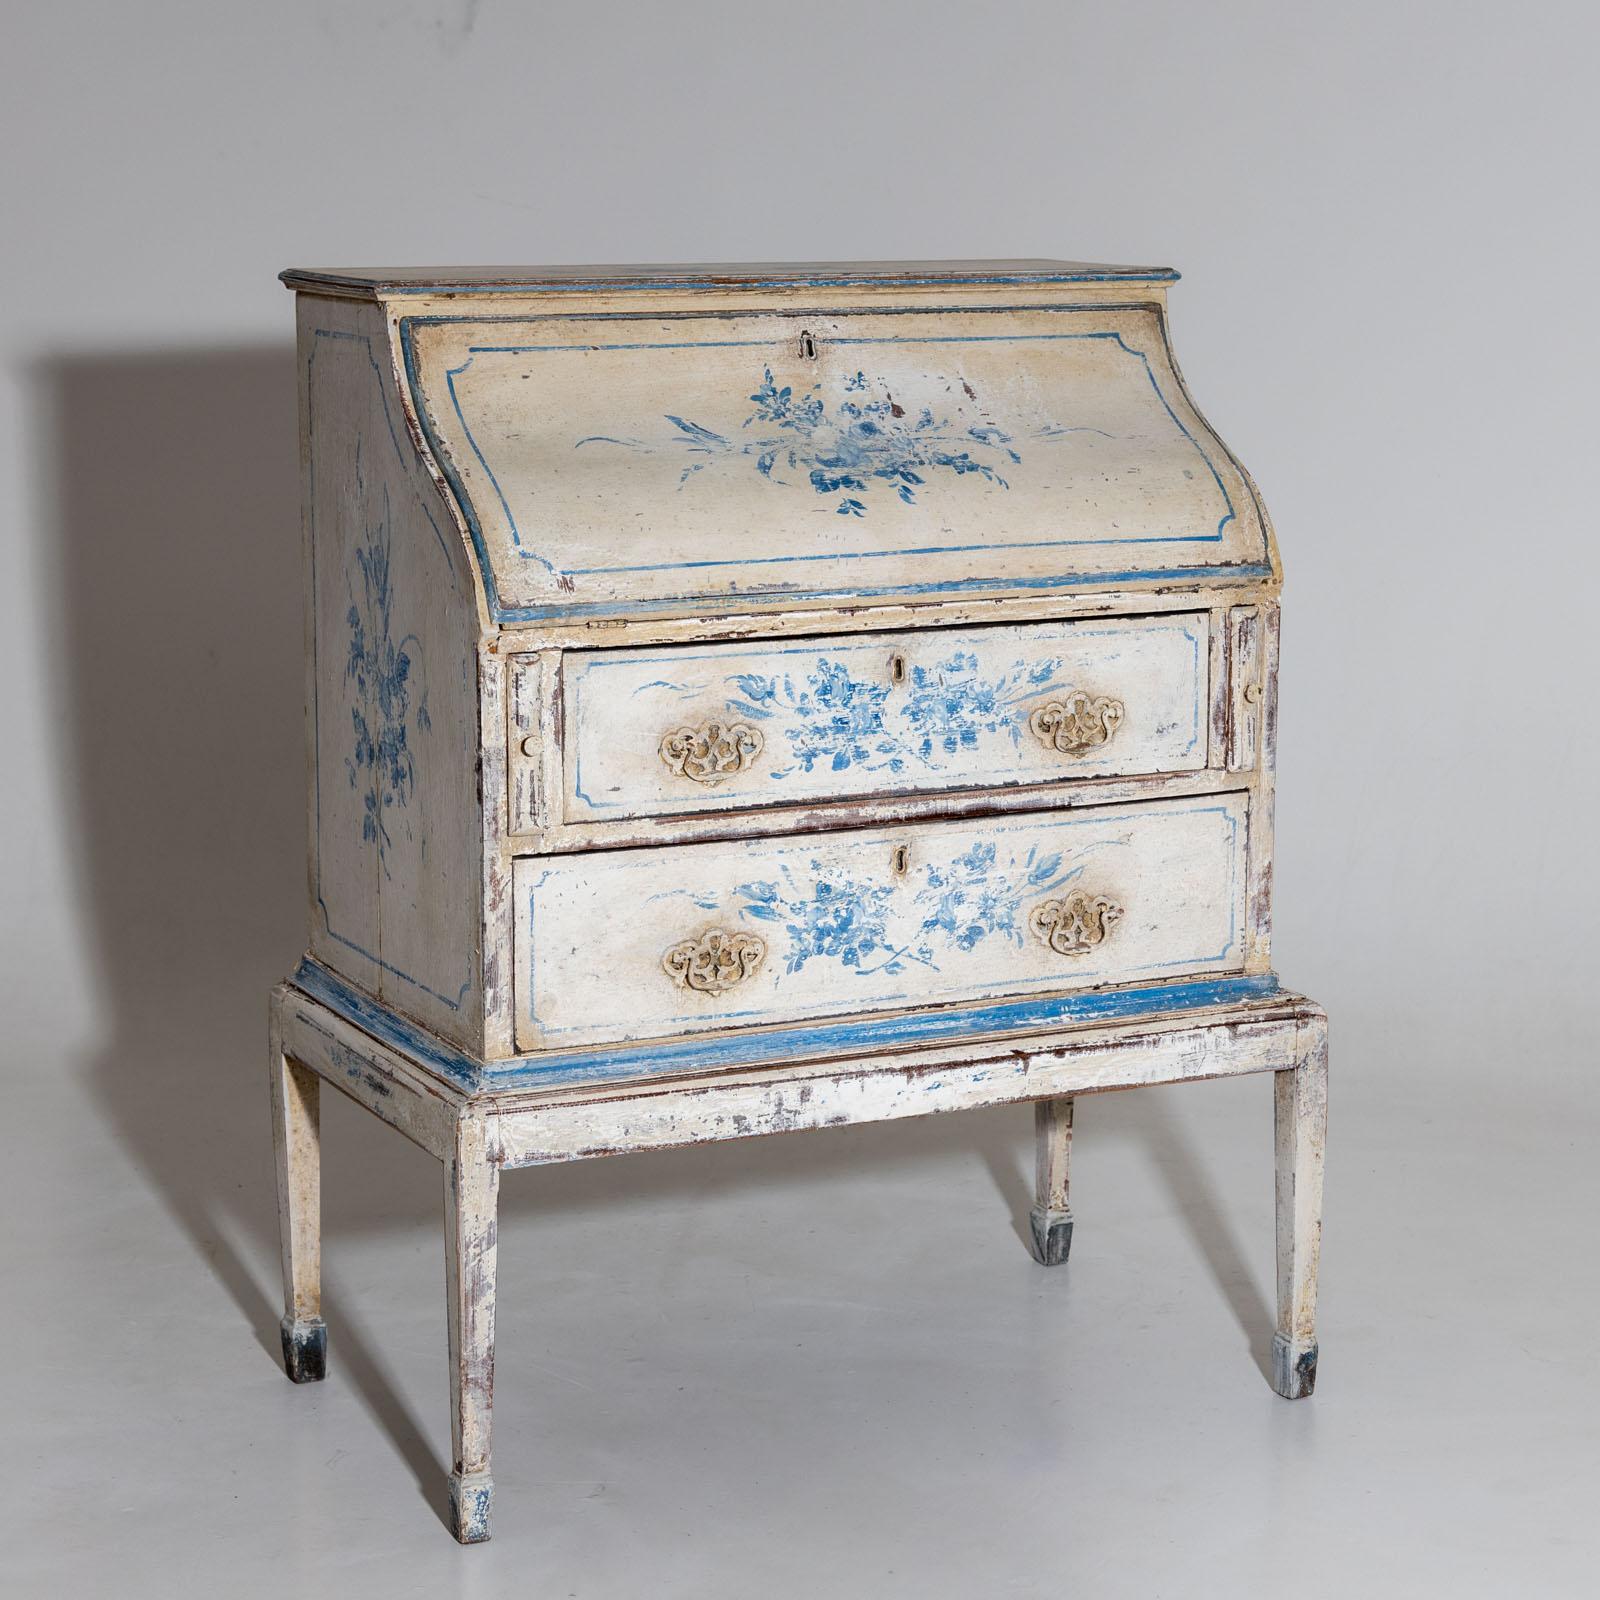 Small painted secretary with two drawers and curved sloping flap. The interior consists of letter compartments with ogival frames and low drawers. The cream white and light blue setting is new and features delicate floral bouquets on the surfaces.
